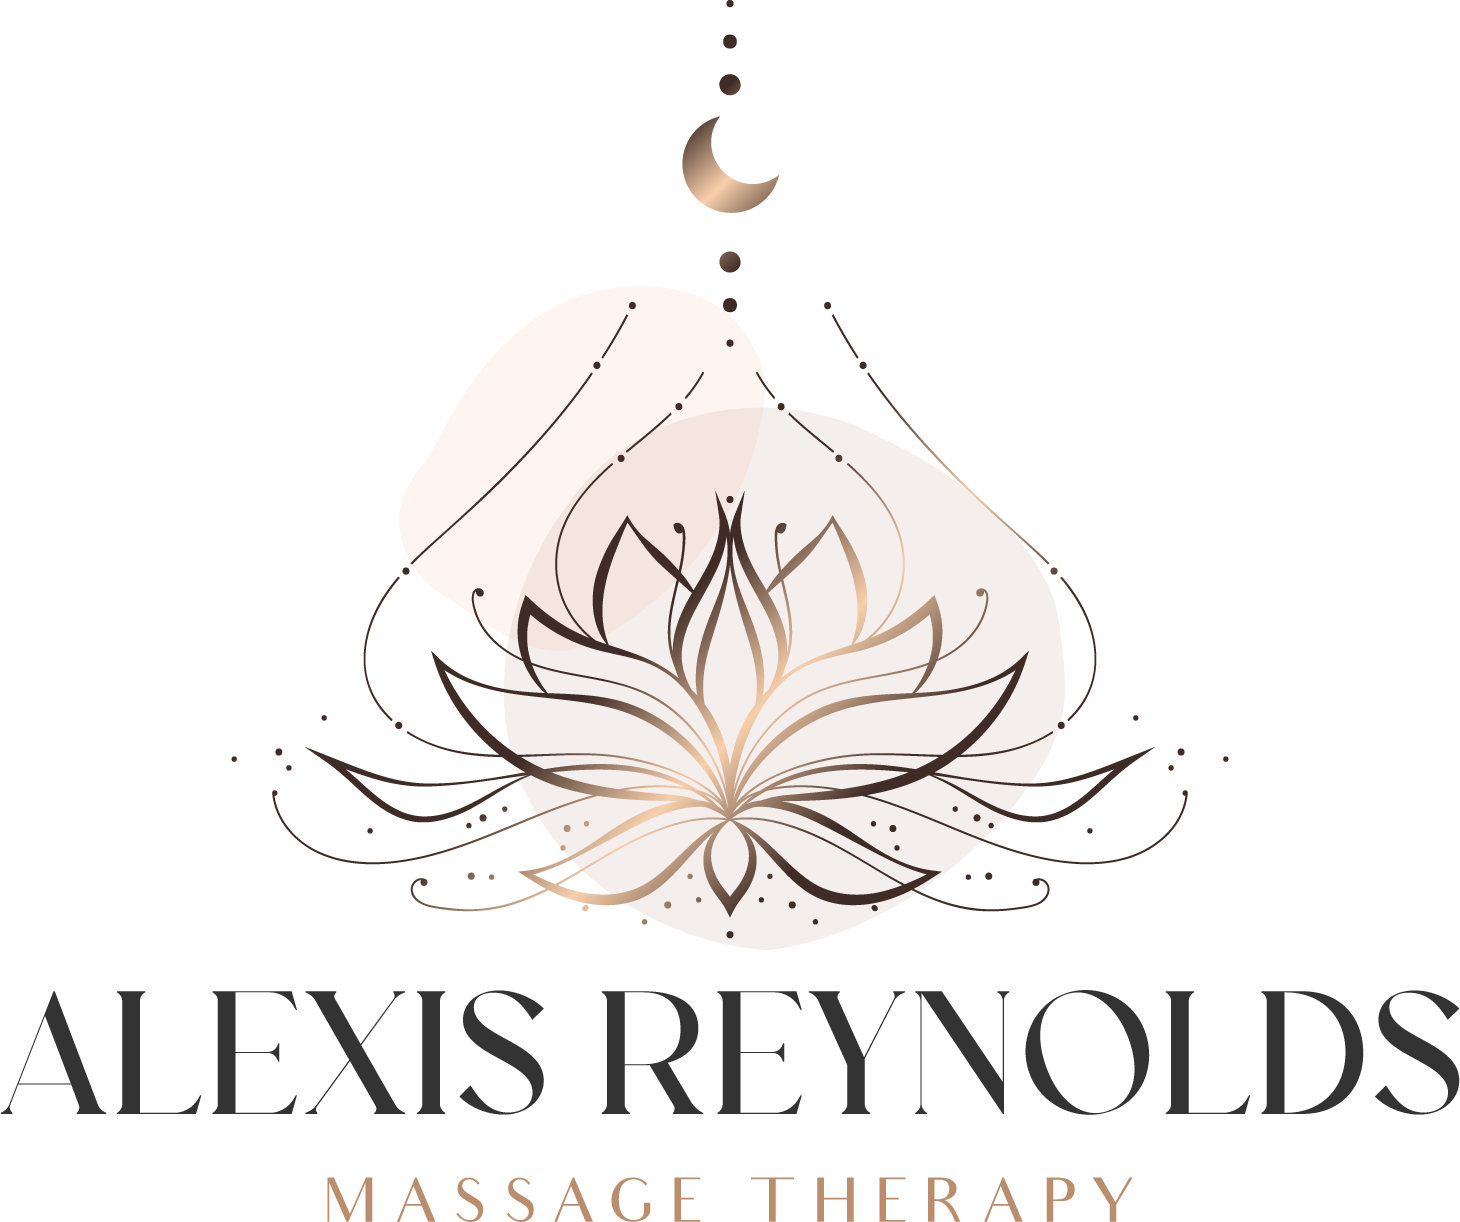 Alexis Reynolds Massage Therapy